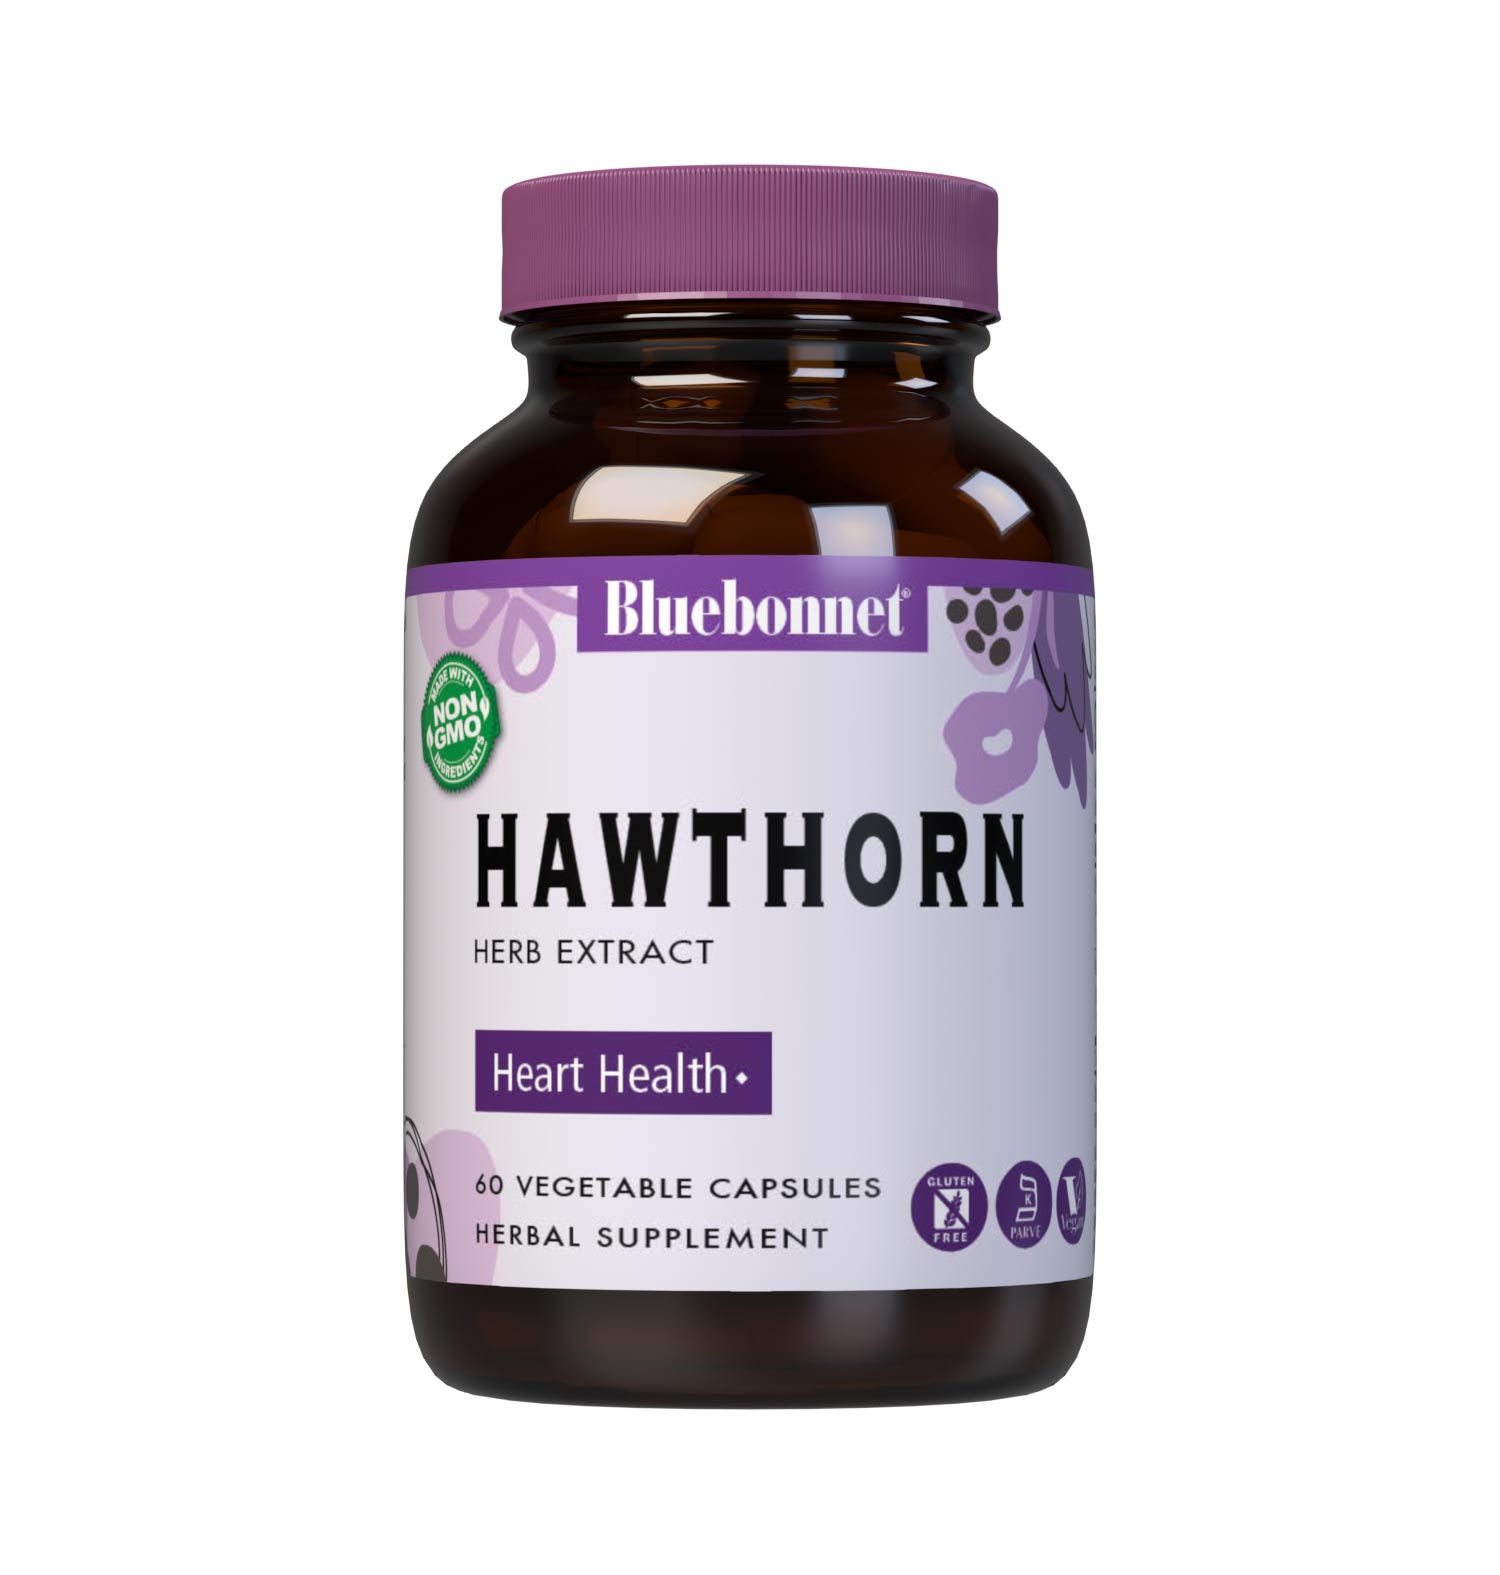 Bluebonnet’s Hawthorn Herb Extract 60 Vegetable Capsules contain a standardized extract of flavonoids and vitexin, the most researched active constituents found in hawthorn. A clean and gentle water-based extraction method is employed to capture and preserve hawthorn’s most valuable components. #size_60 count